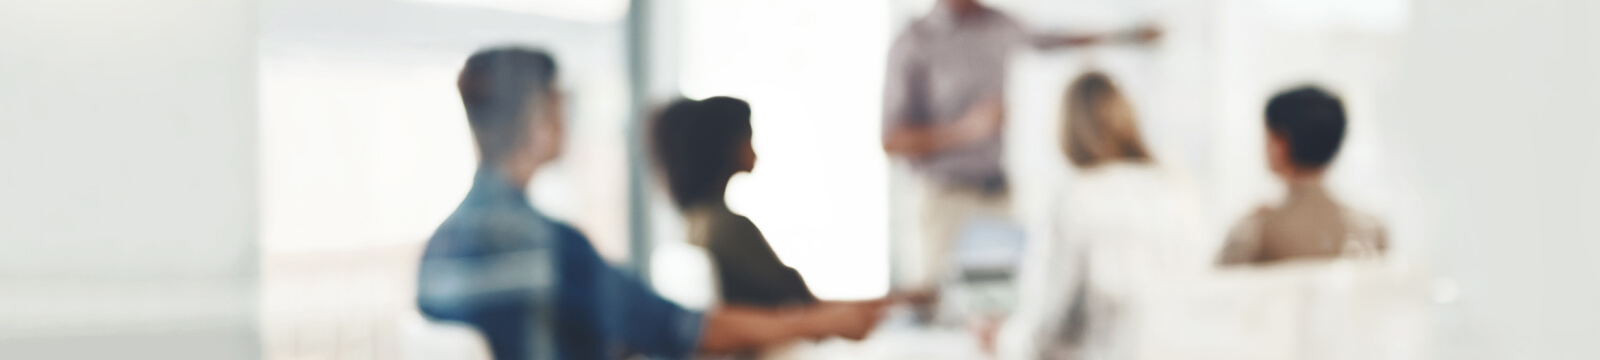 A blurred image of people in a meeting